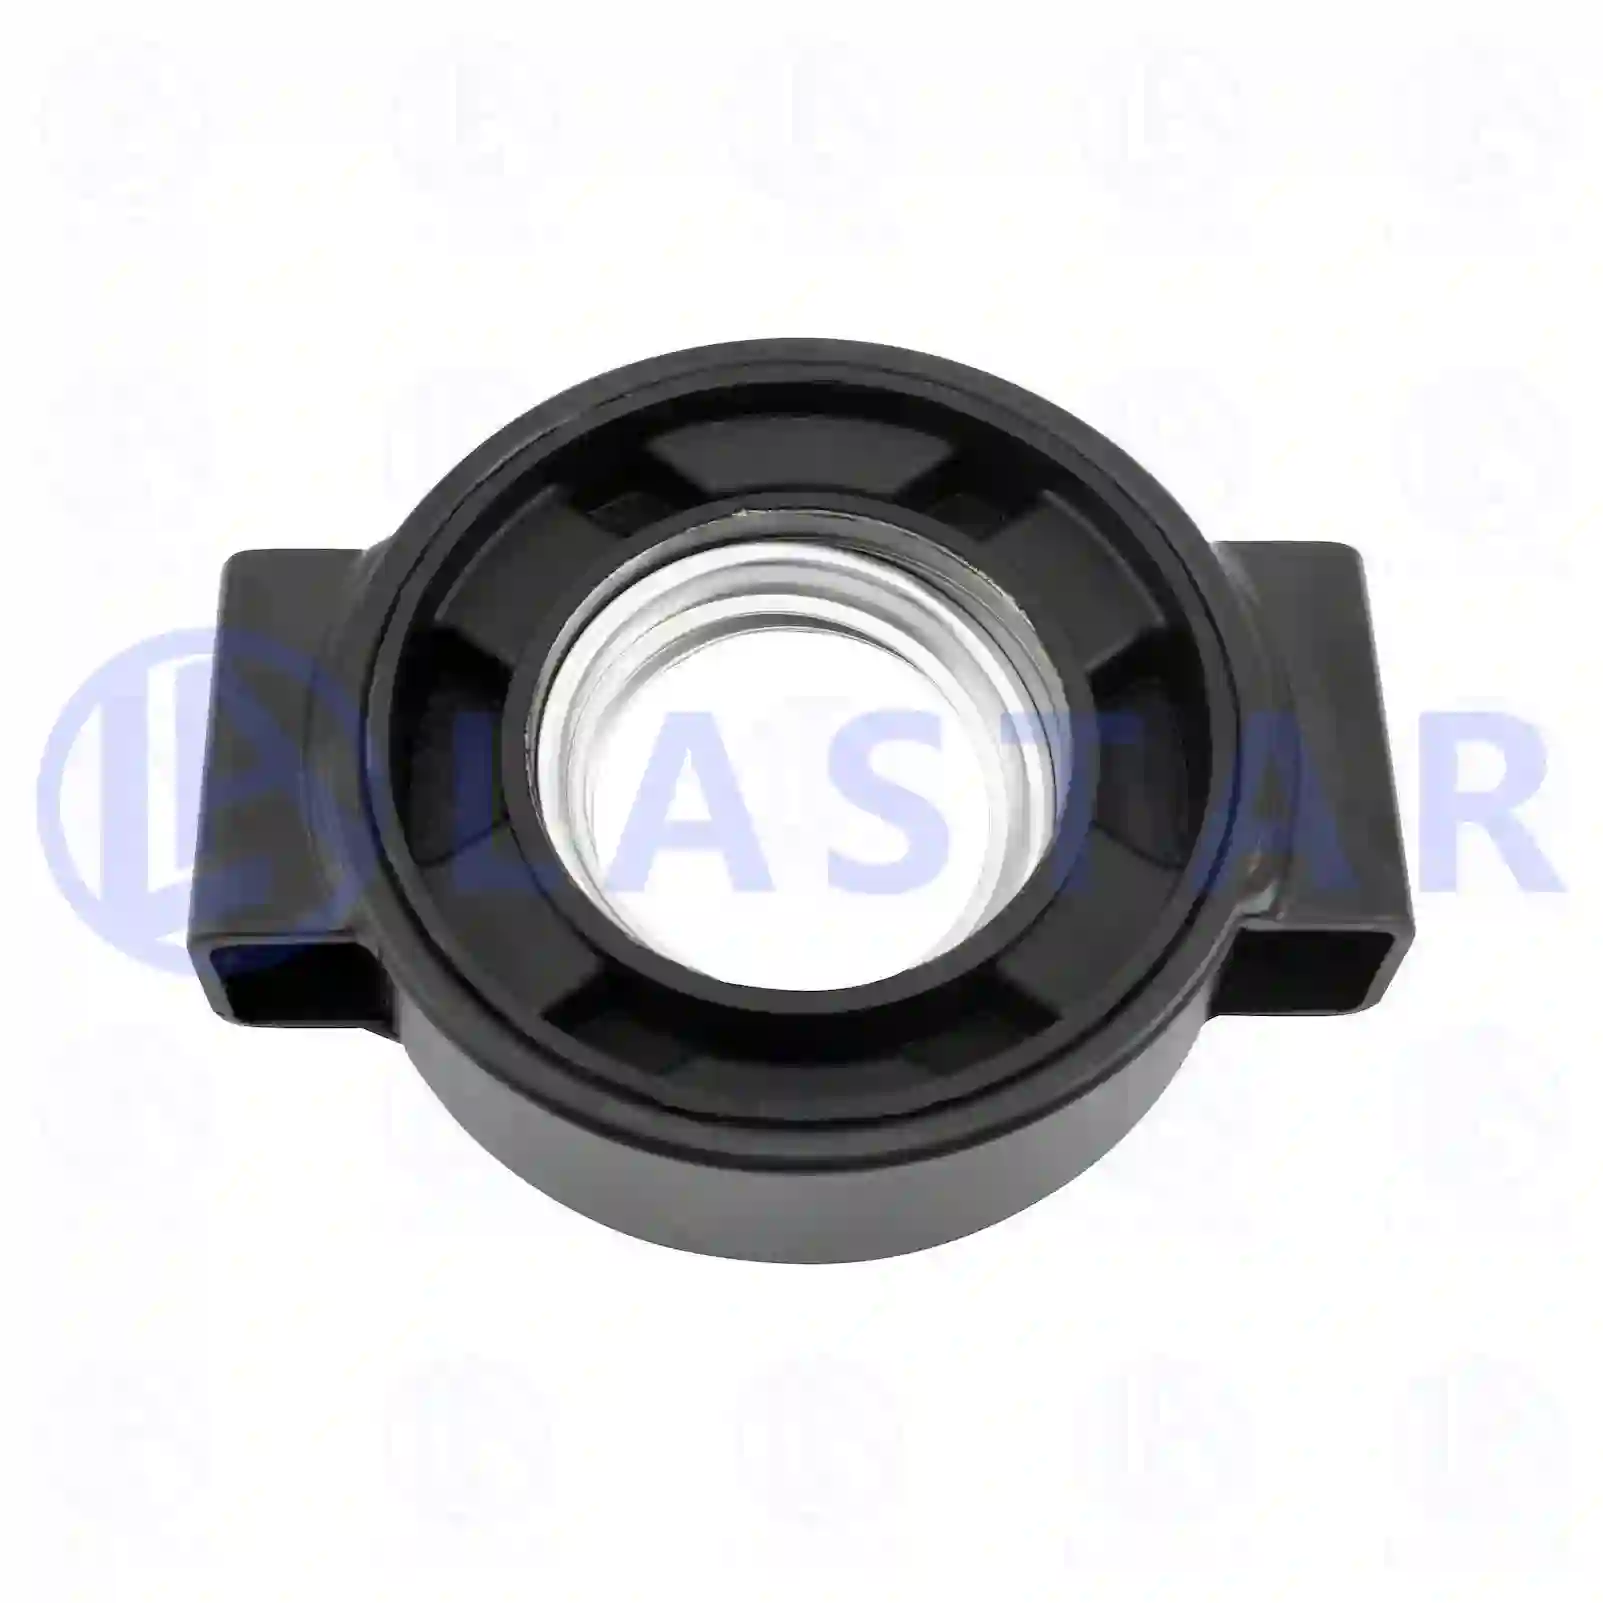 Support Bearing Center bearing, without ball bearing, la no: 77734148 ,  oem no:3954100022, 6204100010, 6554100122 Lastar Spare Part | Truck Spare Parts, Auotomotive Spare Parts